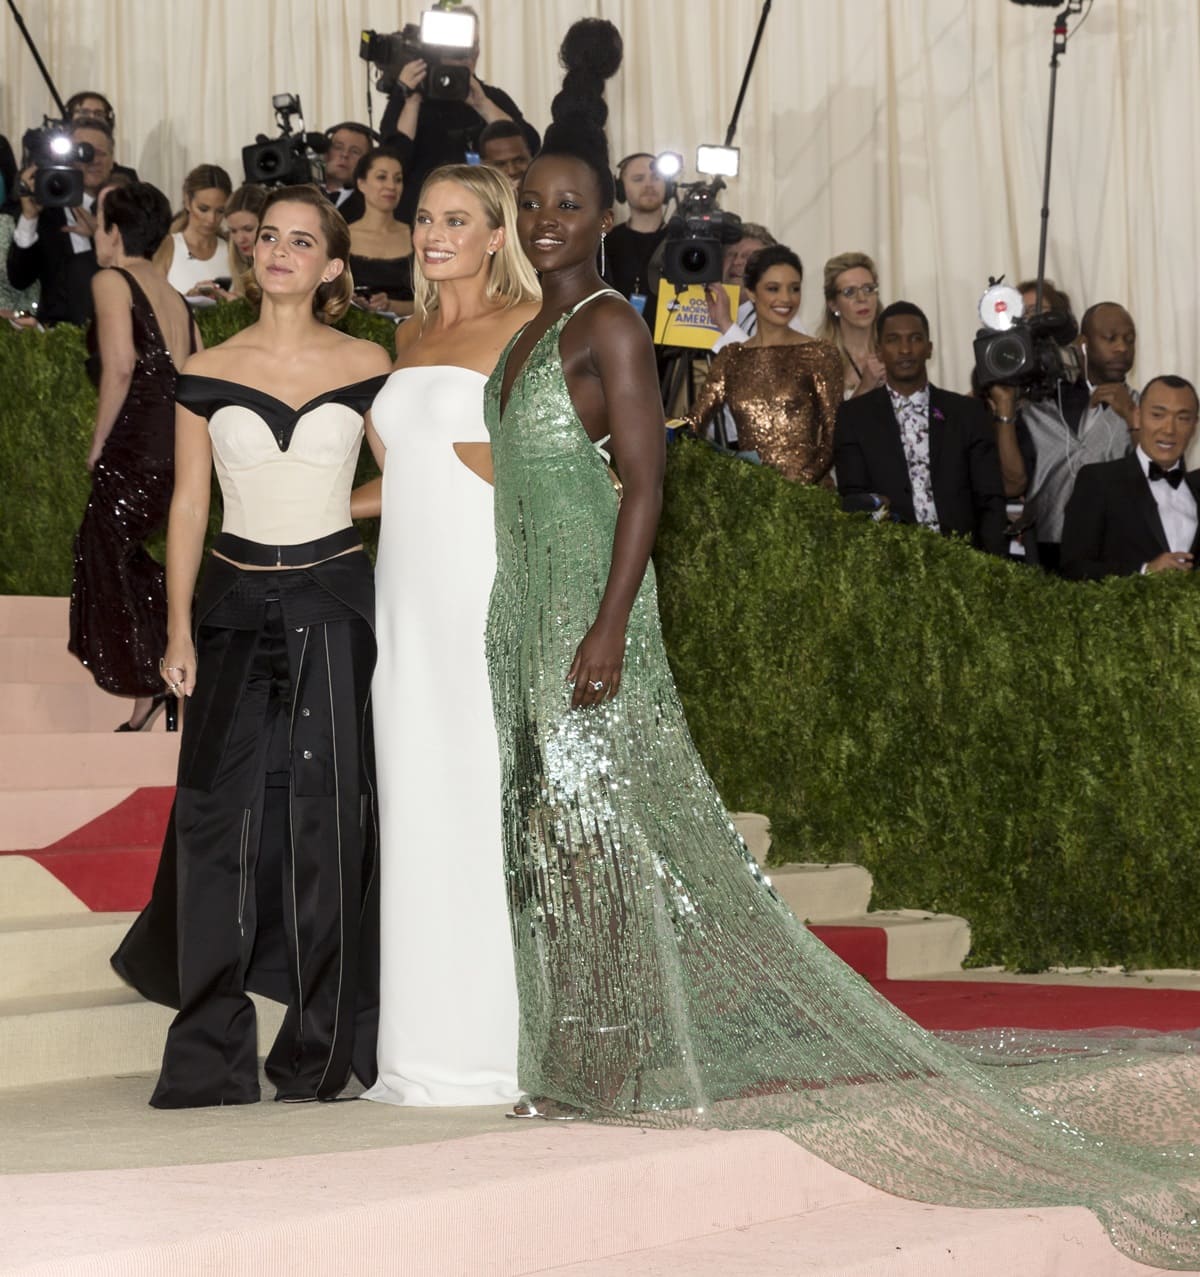 Emma Watson wore a custom Calvin Klein Collection gown made from recycled plastic bottles, Margot Robbie wore a white Calvin Klein Collection dress with metallic details, and Lupita Nyong'o wore a green sequined Calvin Klein Collection dress adorned with colorful jewels and beads at the Manus x Machina: Fashion in an Age of Technology Costume Institute Gala